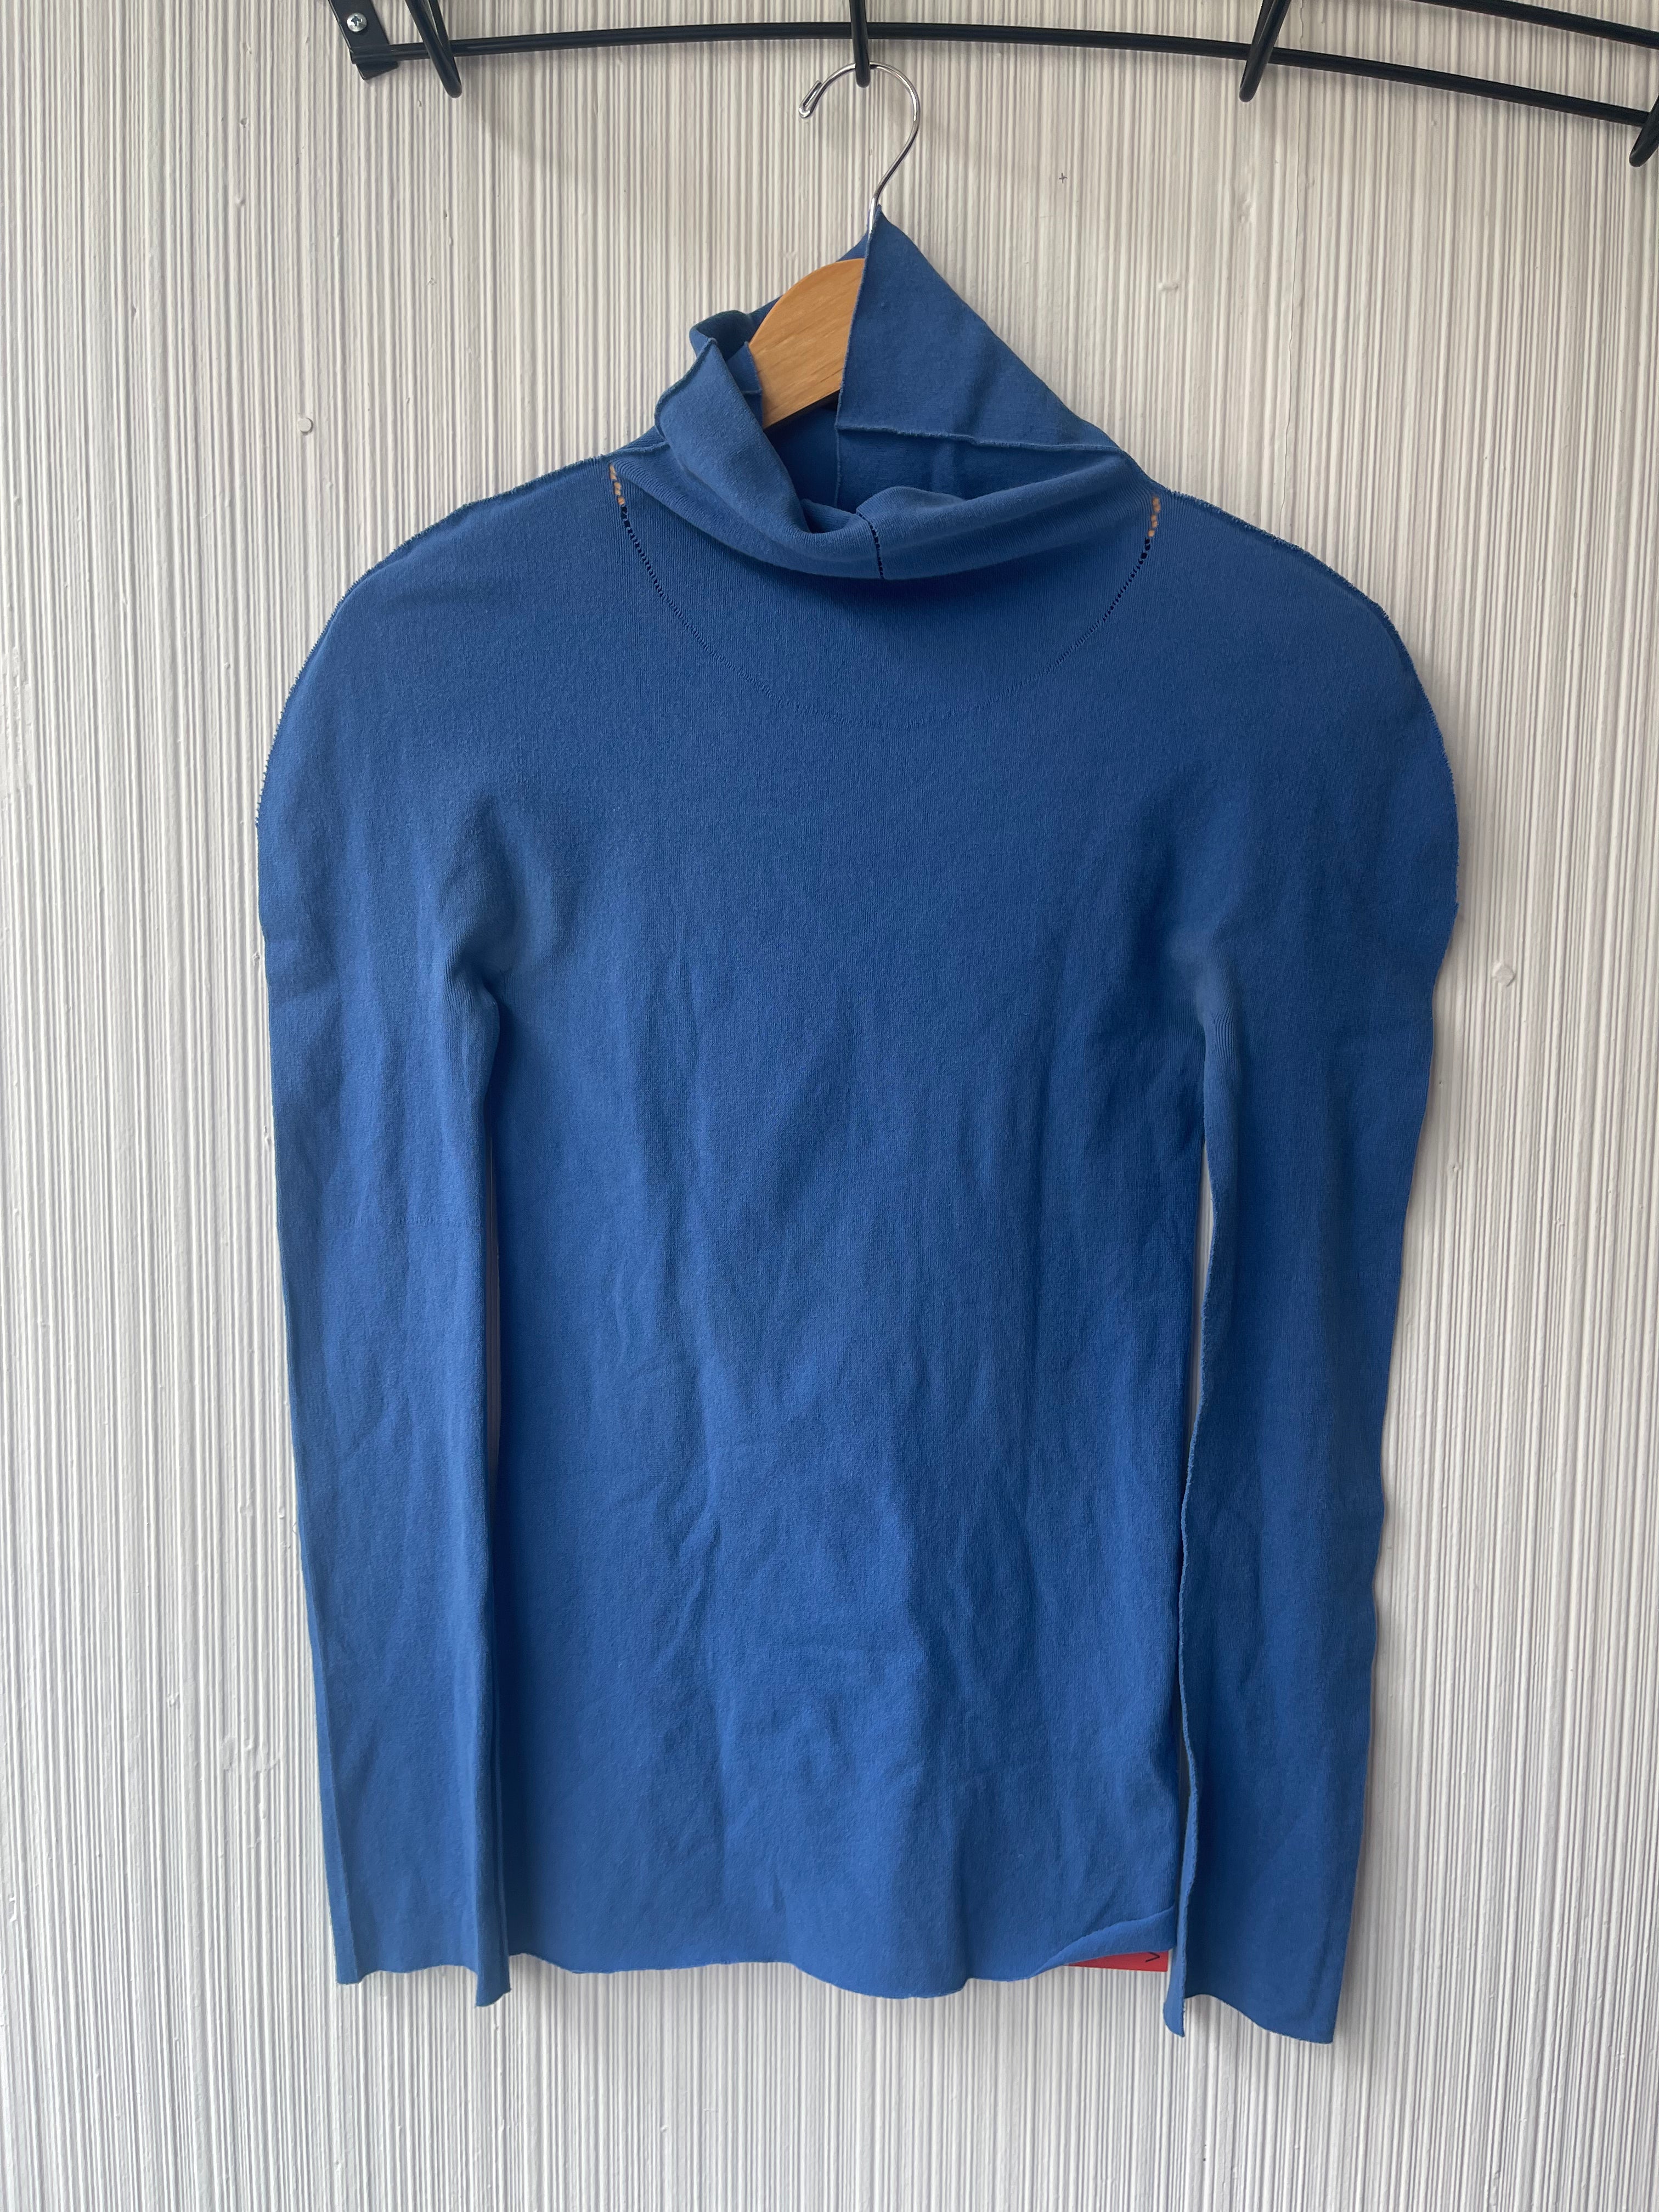 Issey Miyake APOC blue woven net turtle neck top